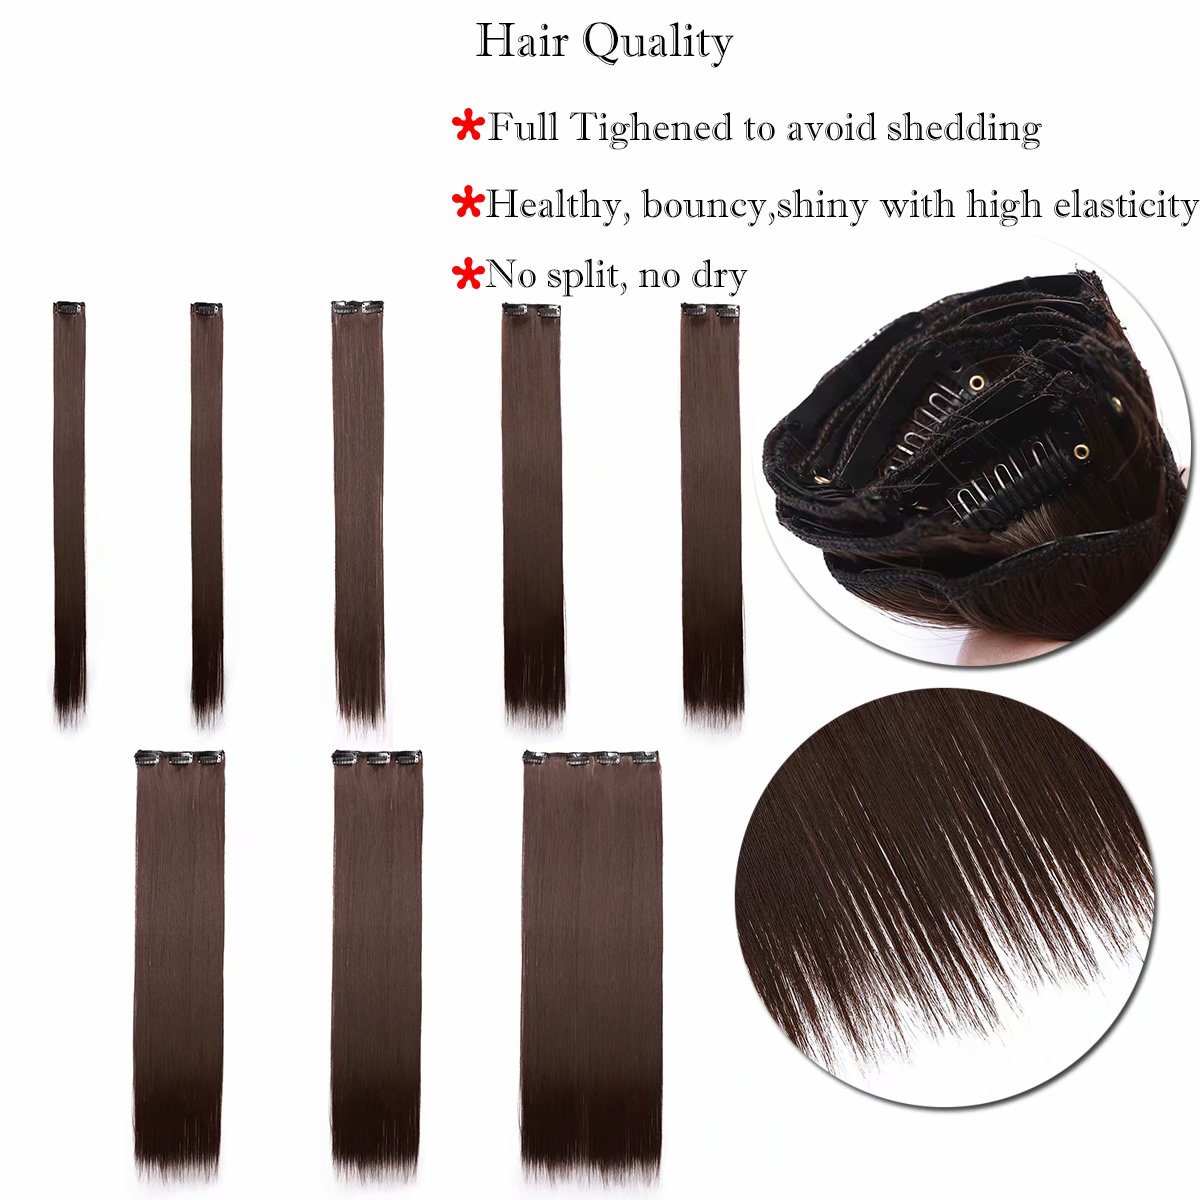 Benehair Clip in Hair Extensions Full Head Long Thick 8 Pieces Hair 18 Clips Curly Wavy Straight Hairpieces 100% Real Natural as Human Best Hair Set 17'' Curly Medium Brown - image 5 of 11